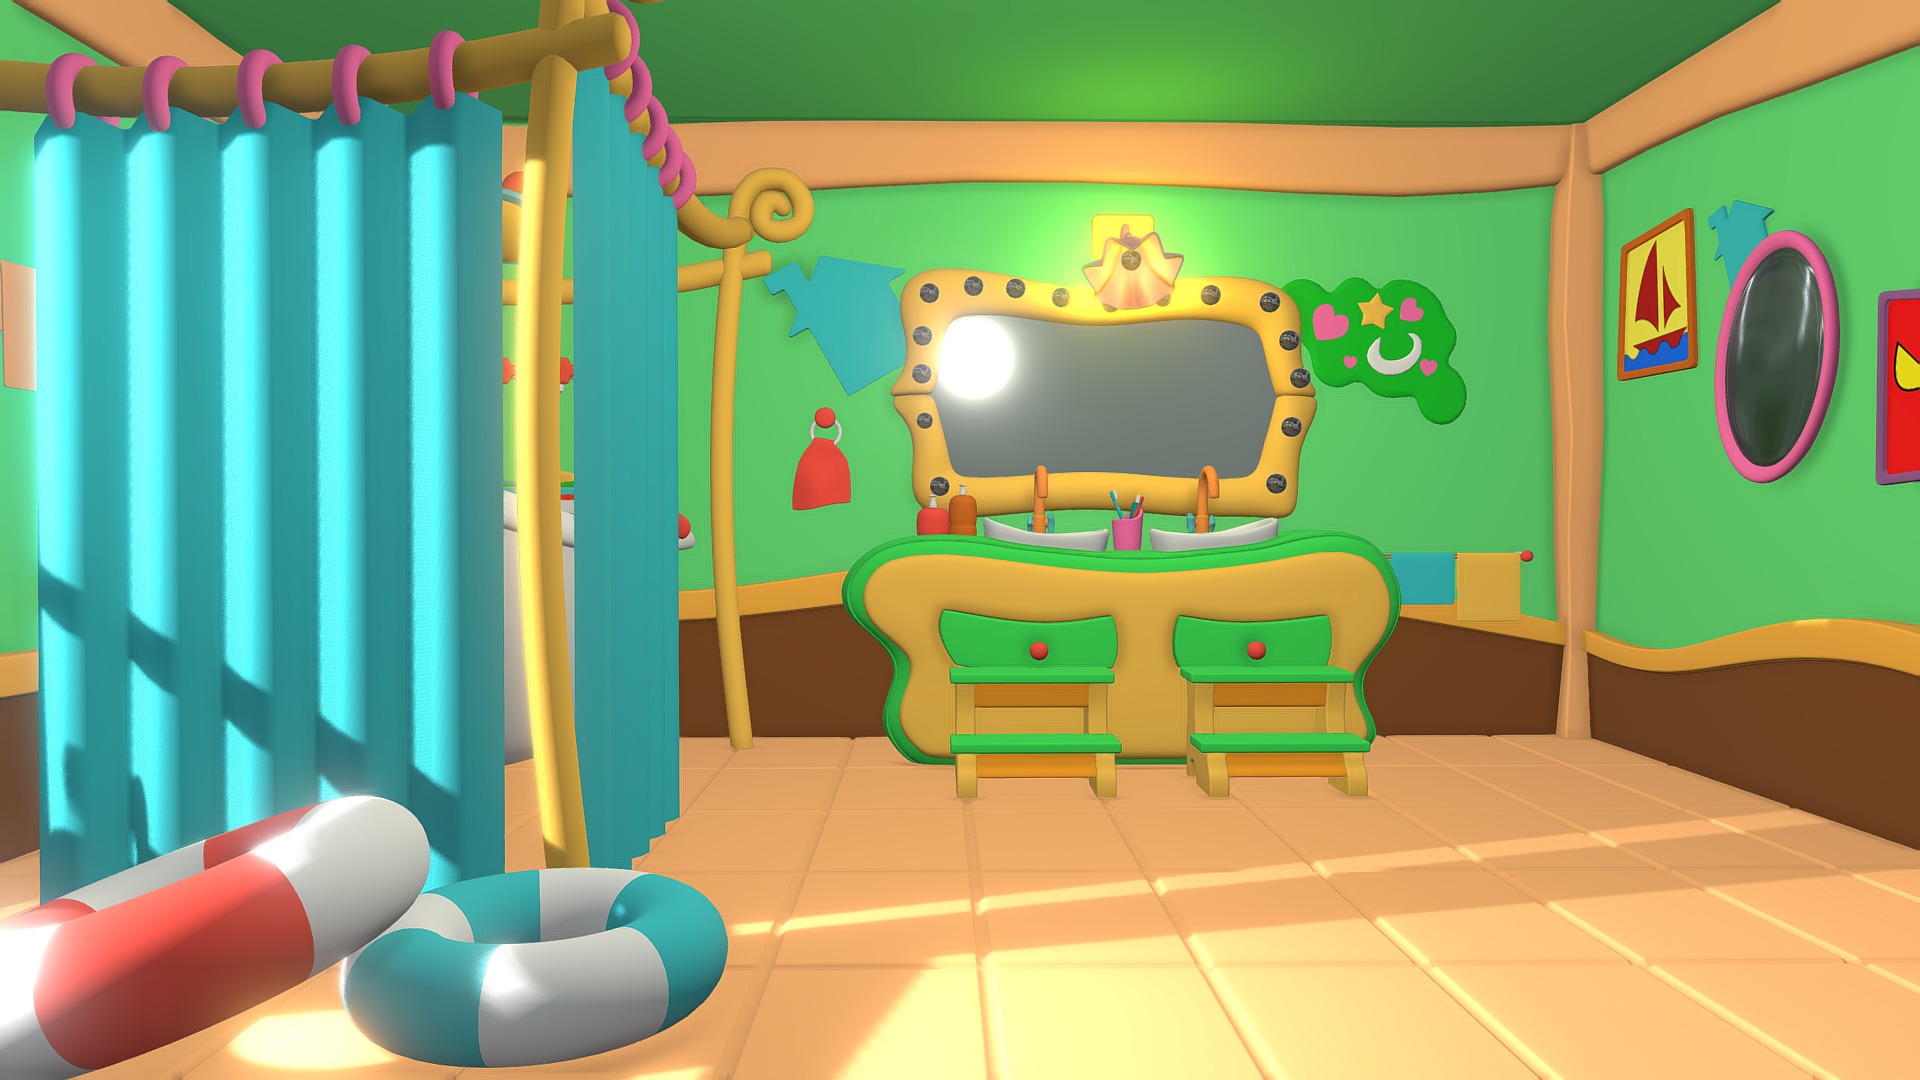 3D model Asset – Cartoons – Bathroom 3D - This is a 3D model of the Asset - Cartoons - Bathroom 3D. The 3D model is about a room with colorful chairs.